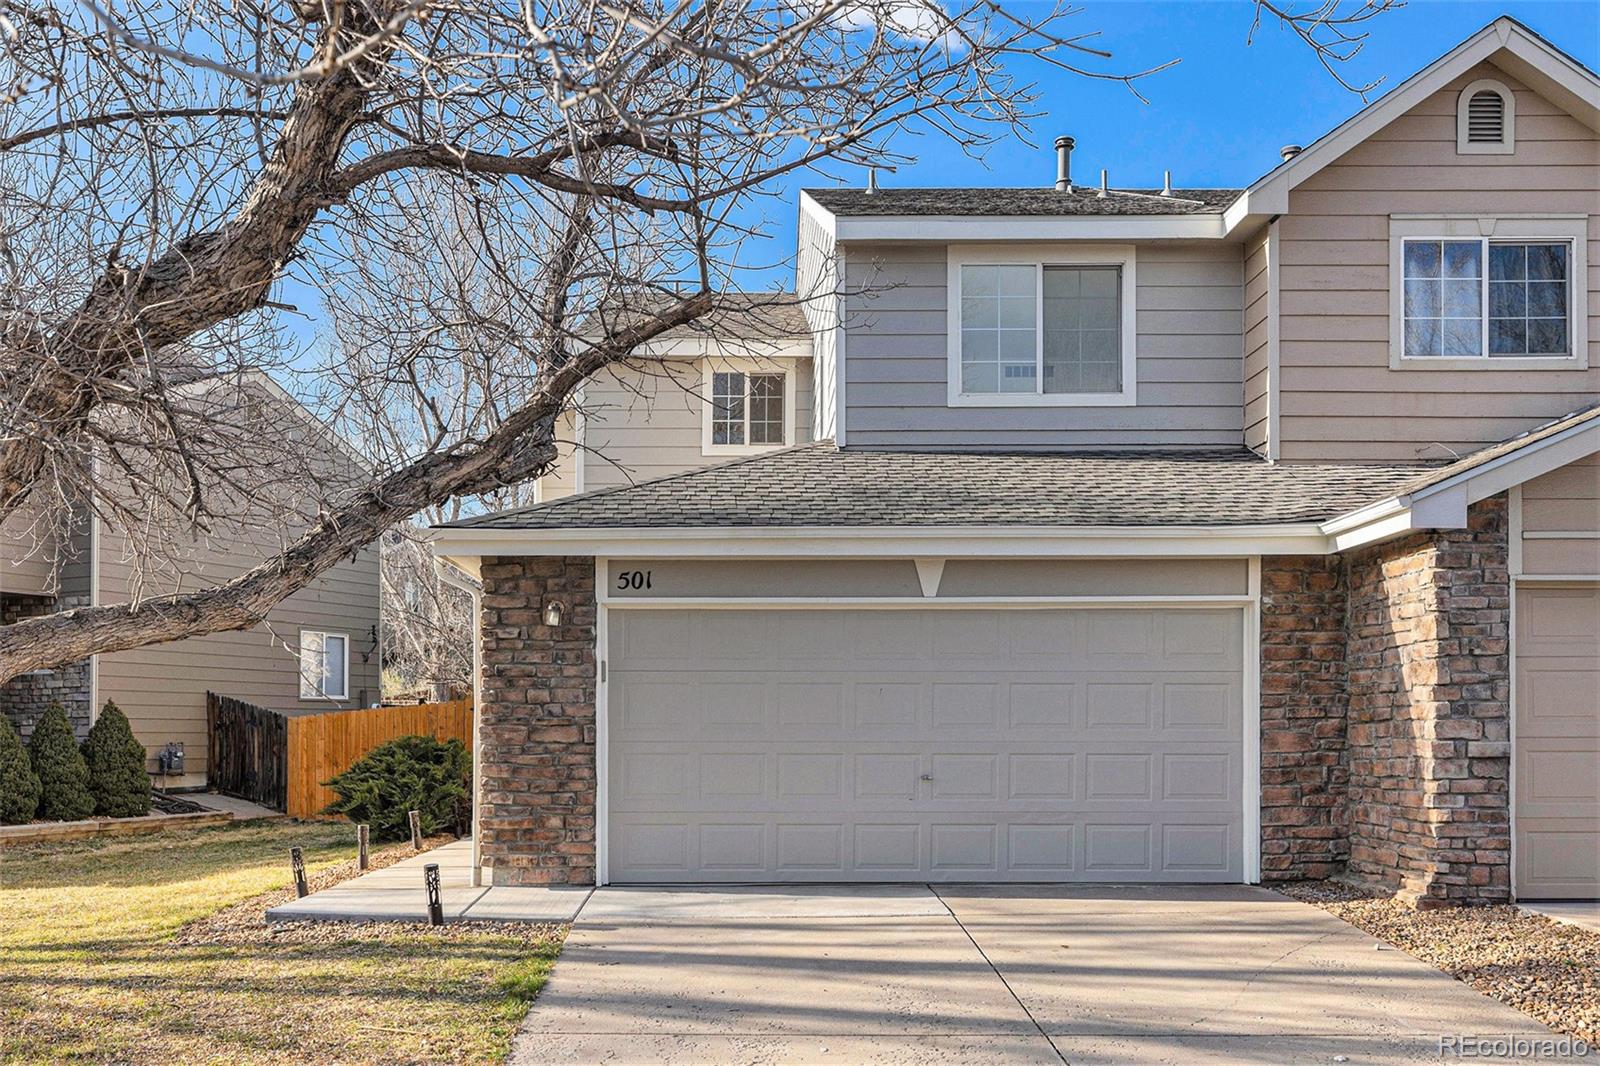 Report Image for 501 W 91st Circle,Thornton, Colorado